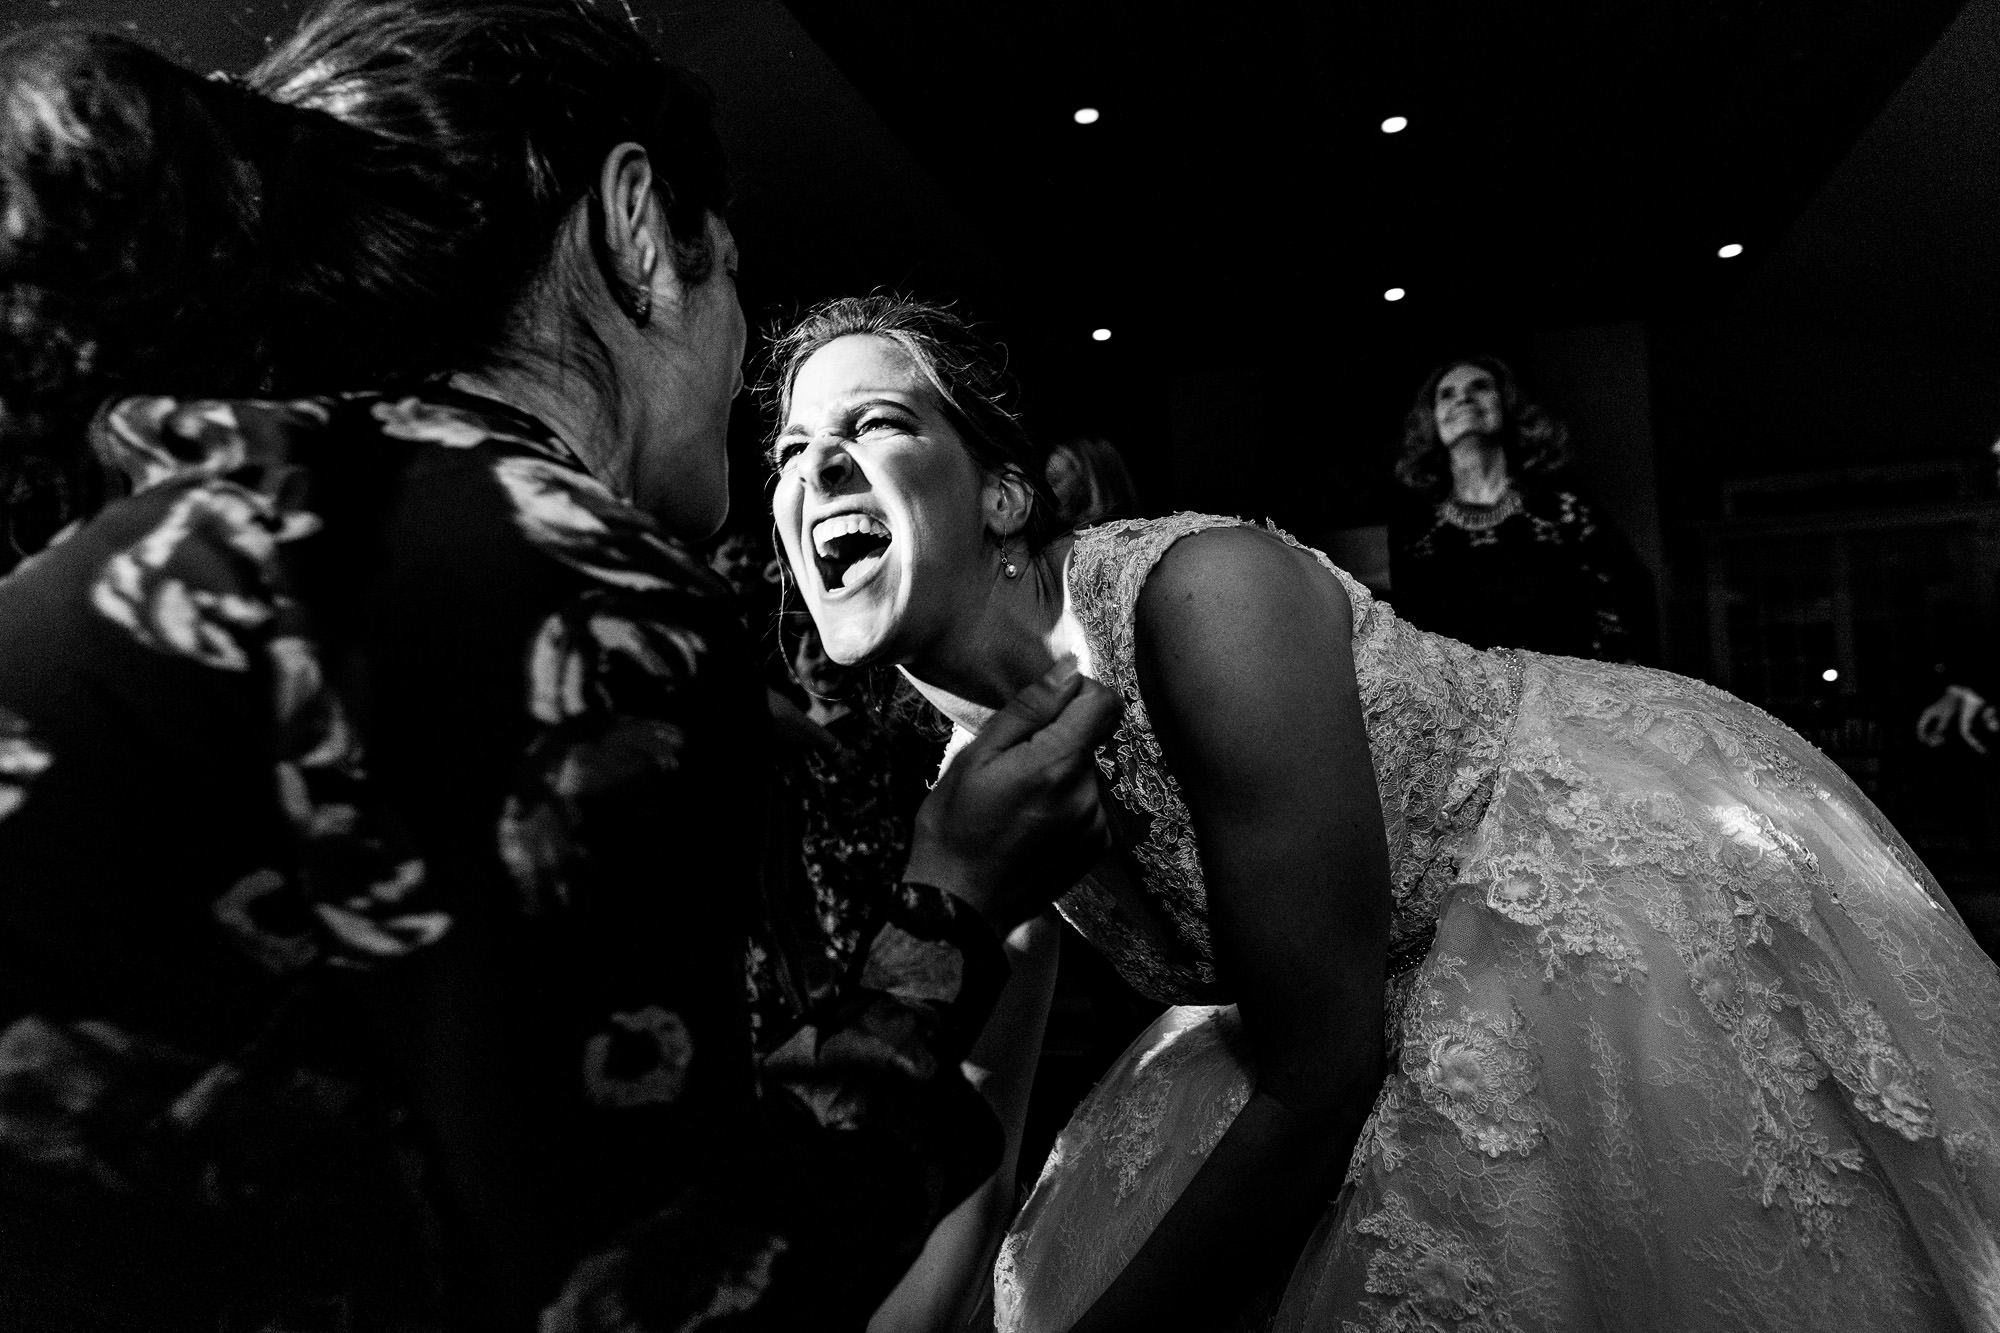 The bride and her friend dance rigorously at her wedding.